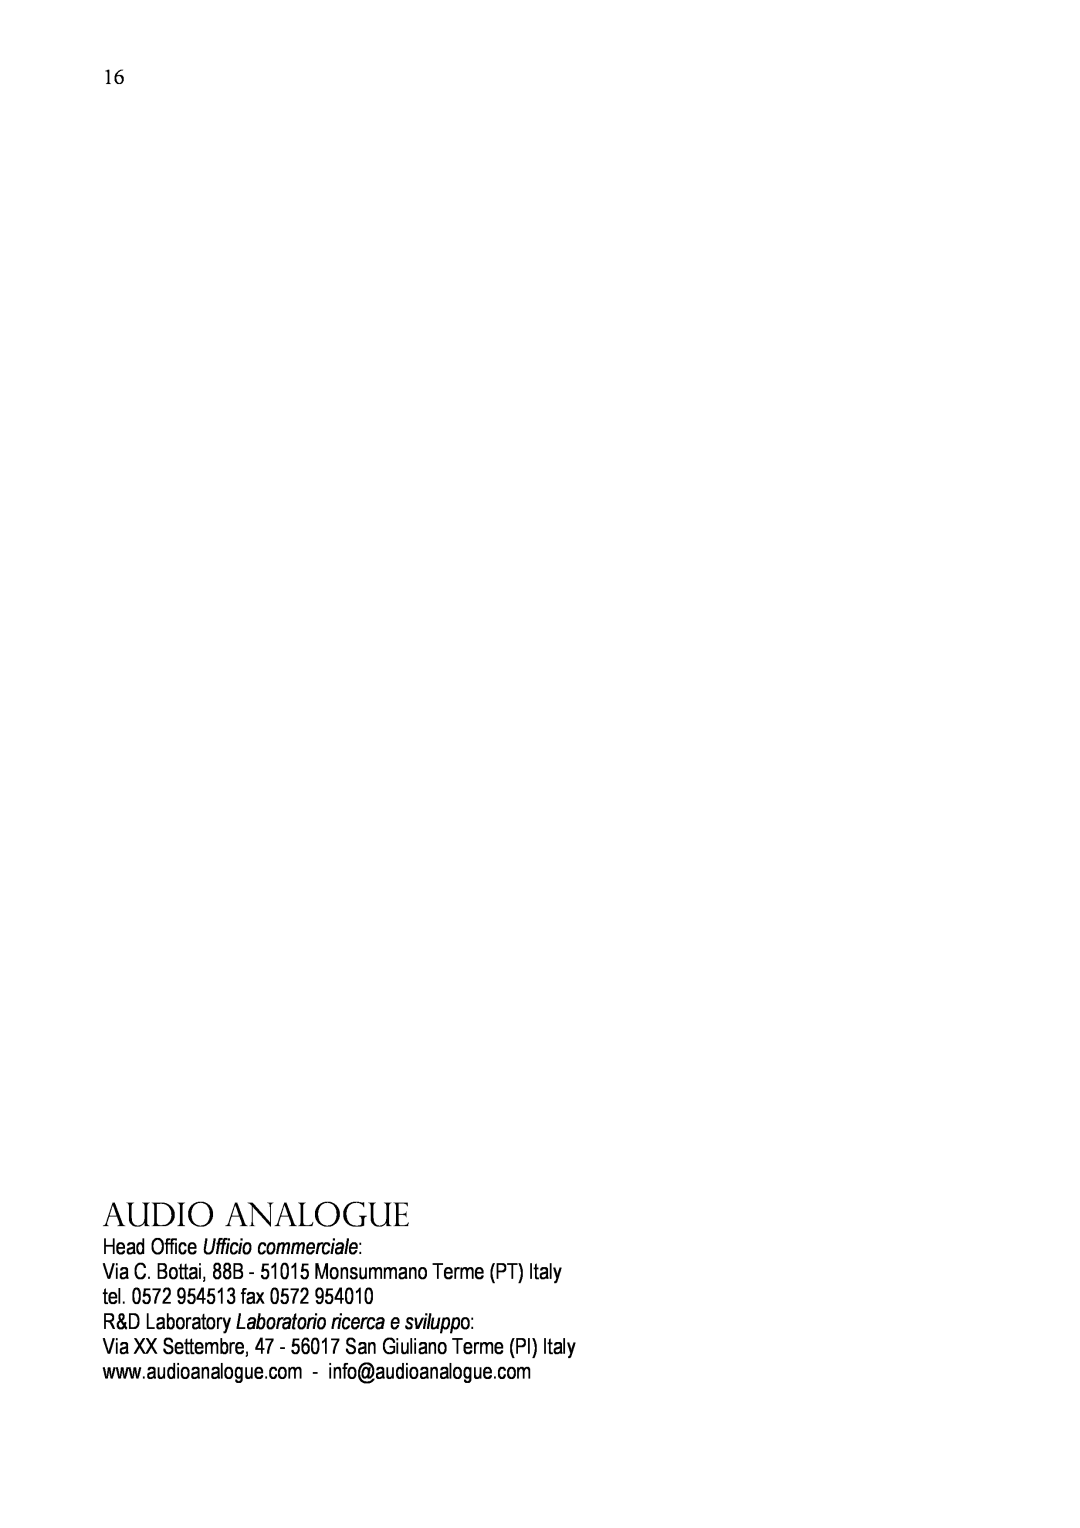 Audio Analogue SRL e t t a n t a owner manual Audio analogue, Head Office Ufficio commerciale 